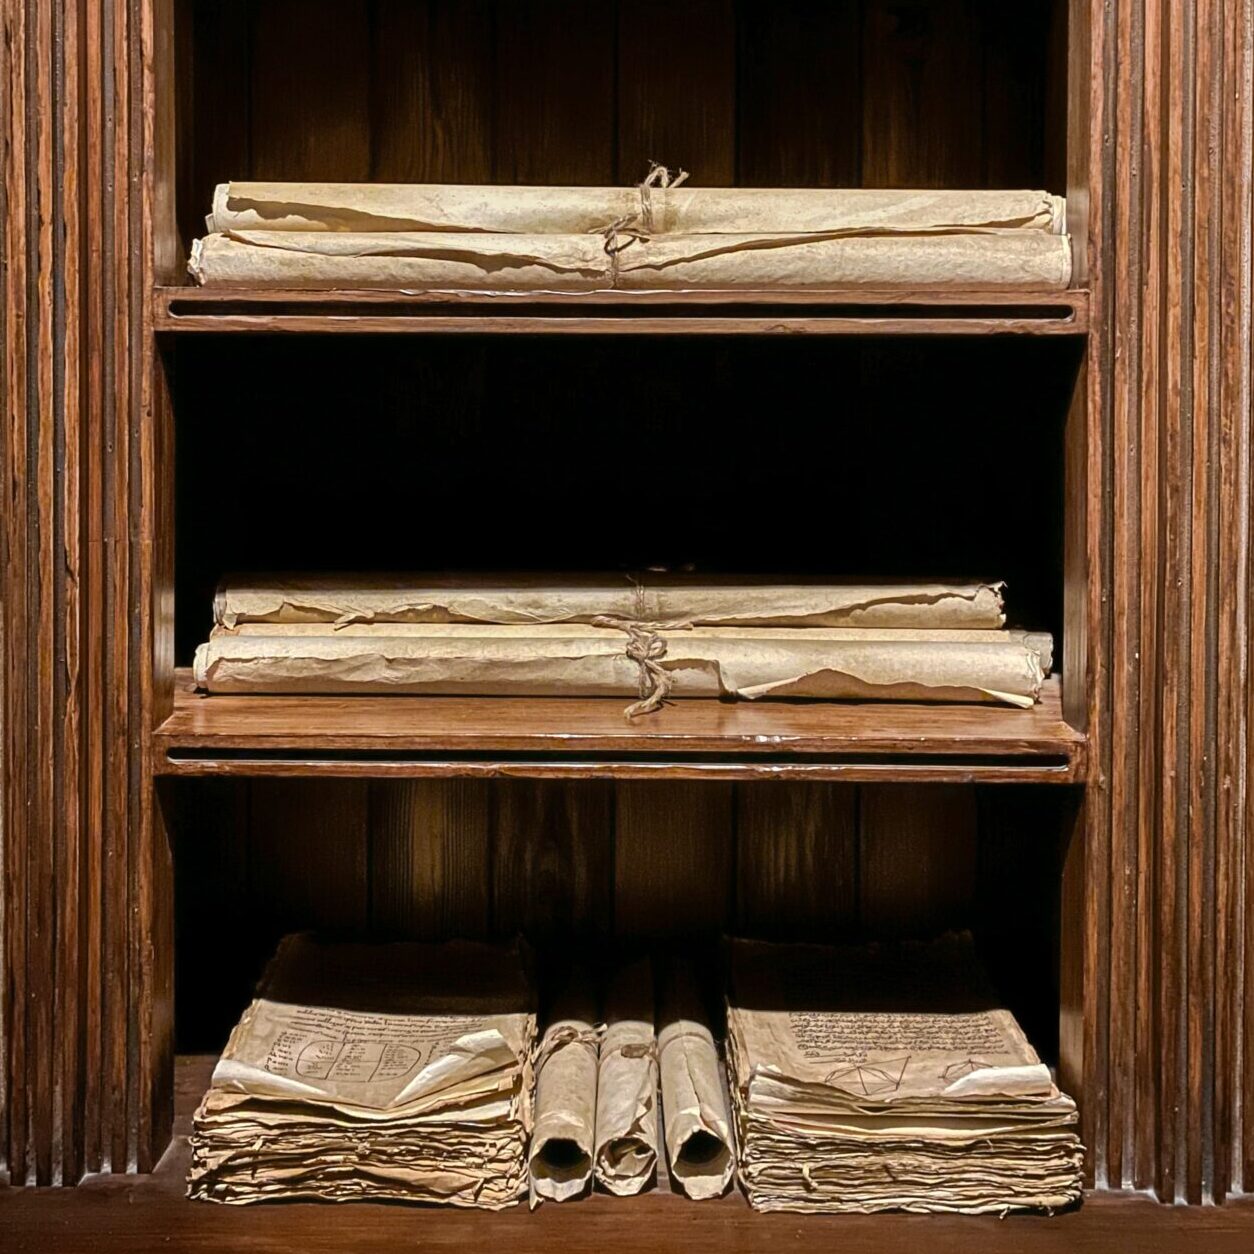 a collection of old scrolls on wooden shelves